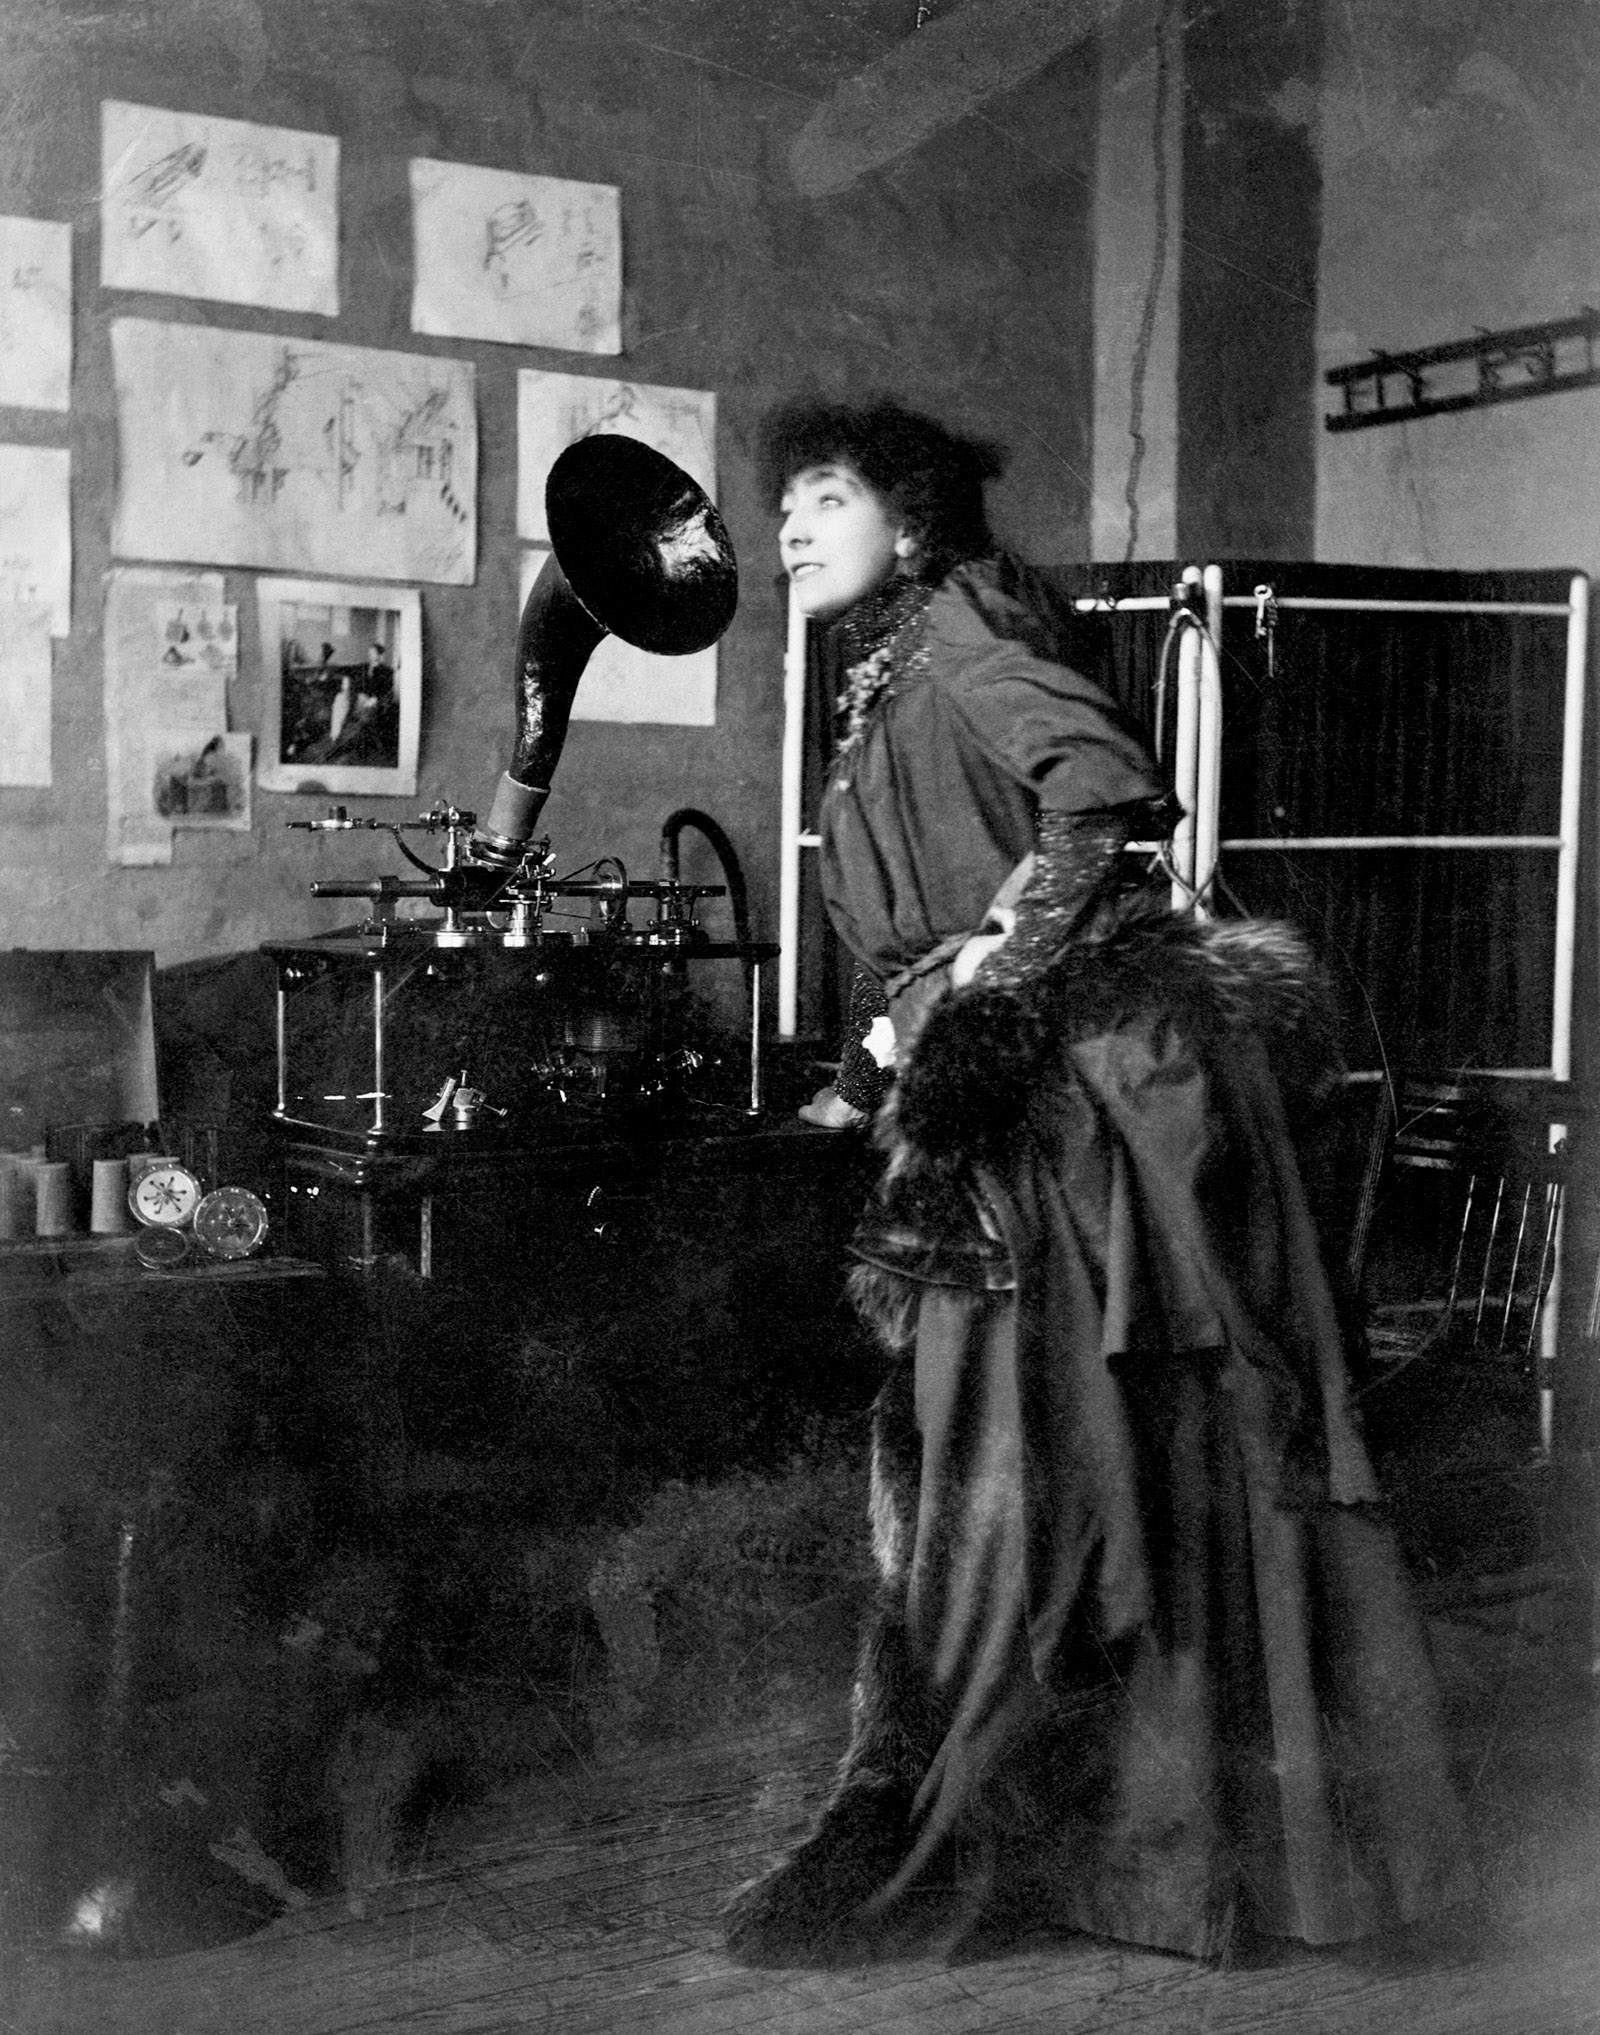 Sarah Bernhardt listening to a recording of her voice, New York City, early 1890s